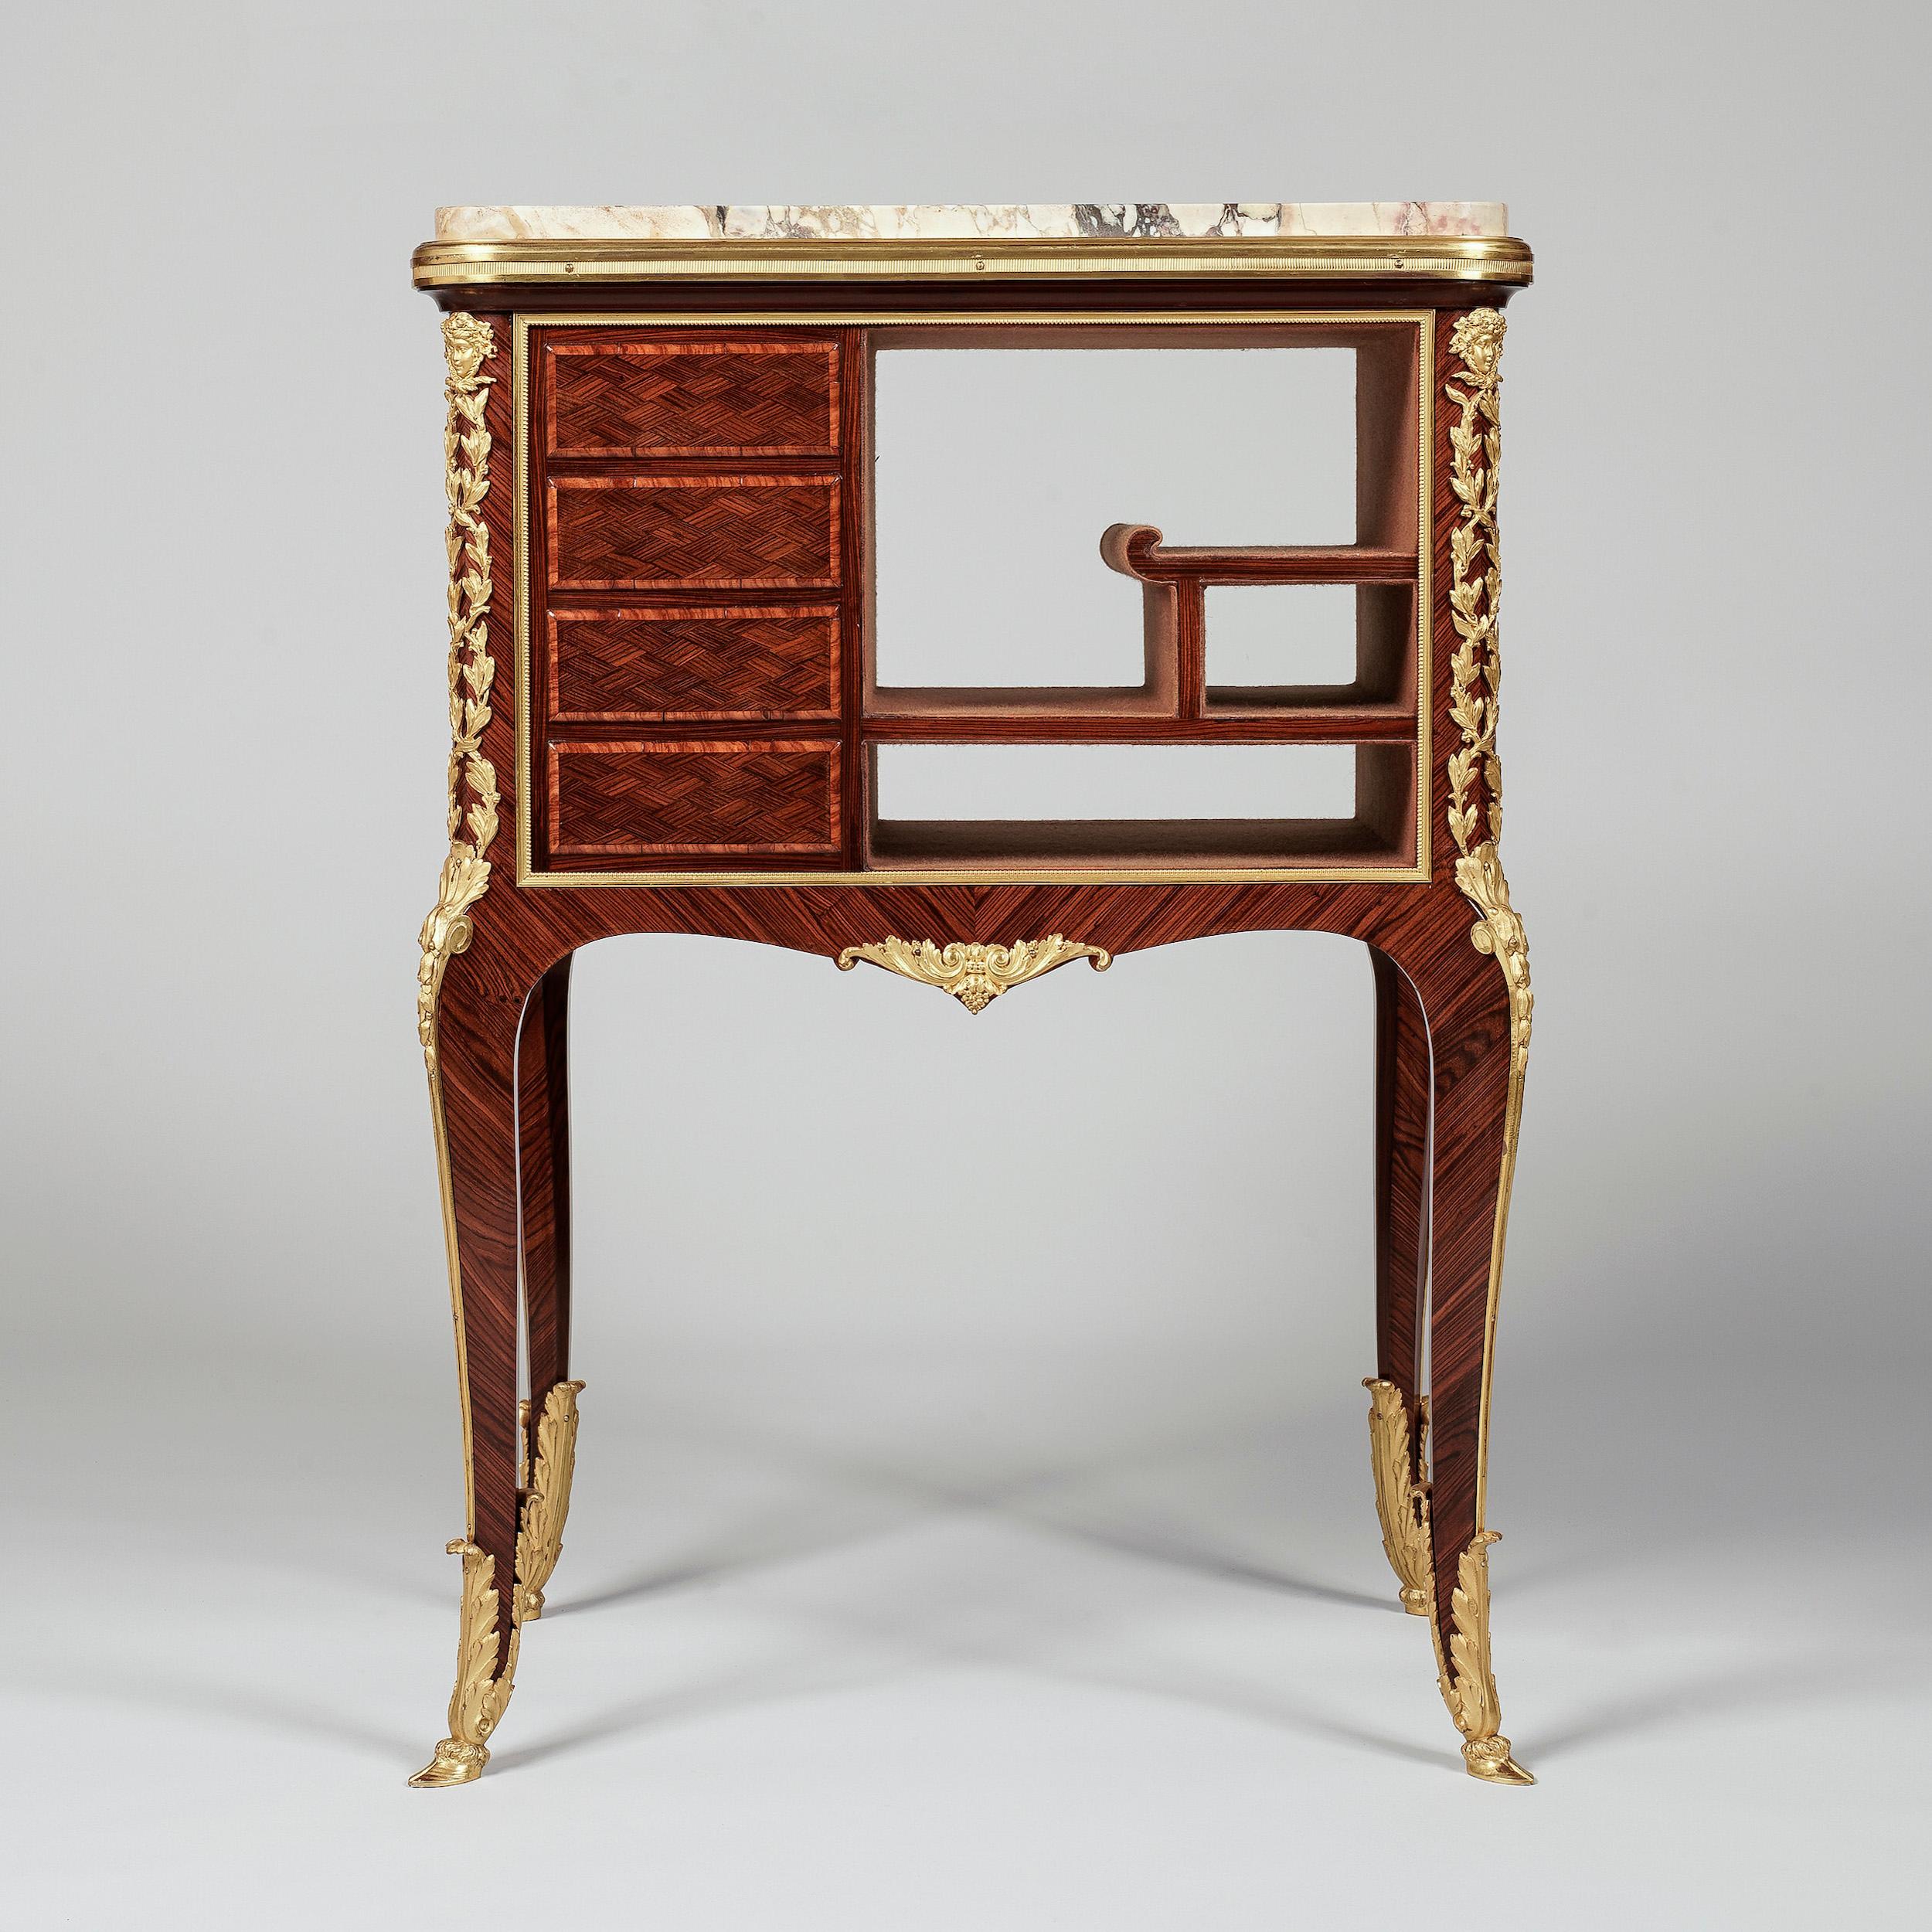 A Louis XVI style table Ambulante
By Francois Linke

The master ébéniste using kingwood and tulipwood to great effect, with foliate ormolu mounts, rising form hoof-foot and acanthus leaf sabots with espagnolettes adorning the cabriole legs, above